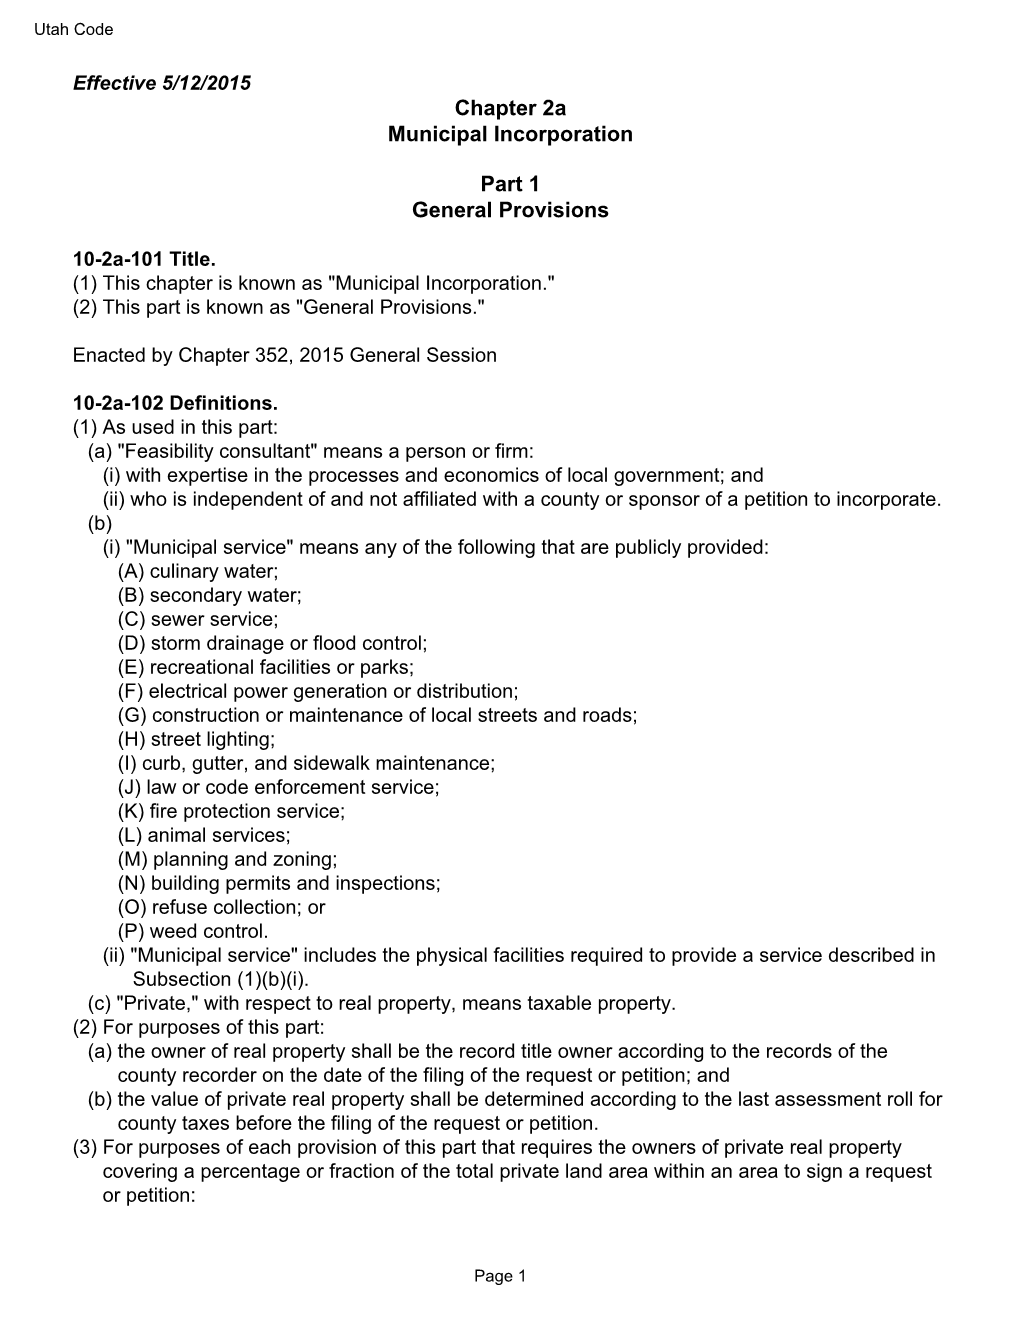 Chapter 2A Municipal Incorporation Part 1 General Provisions